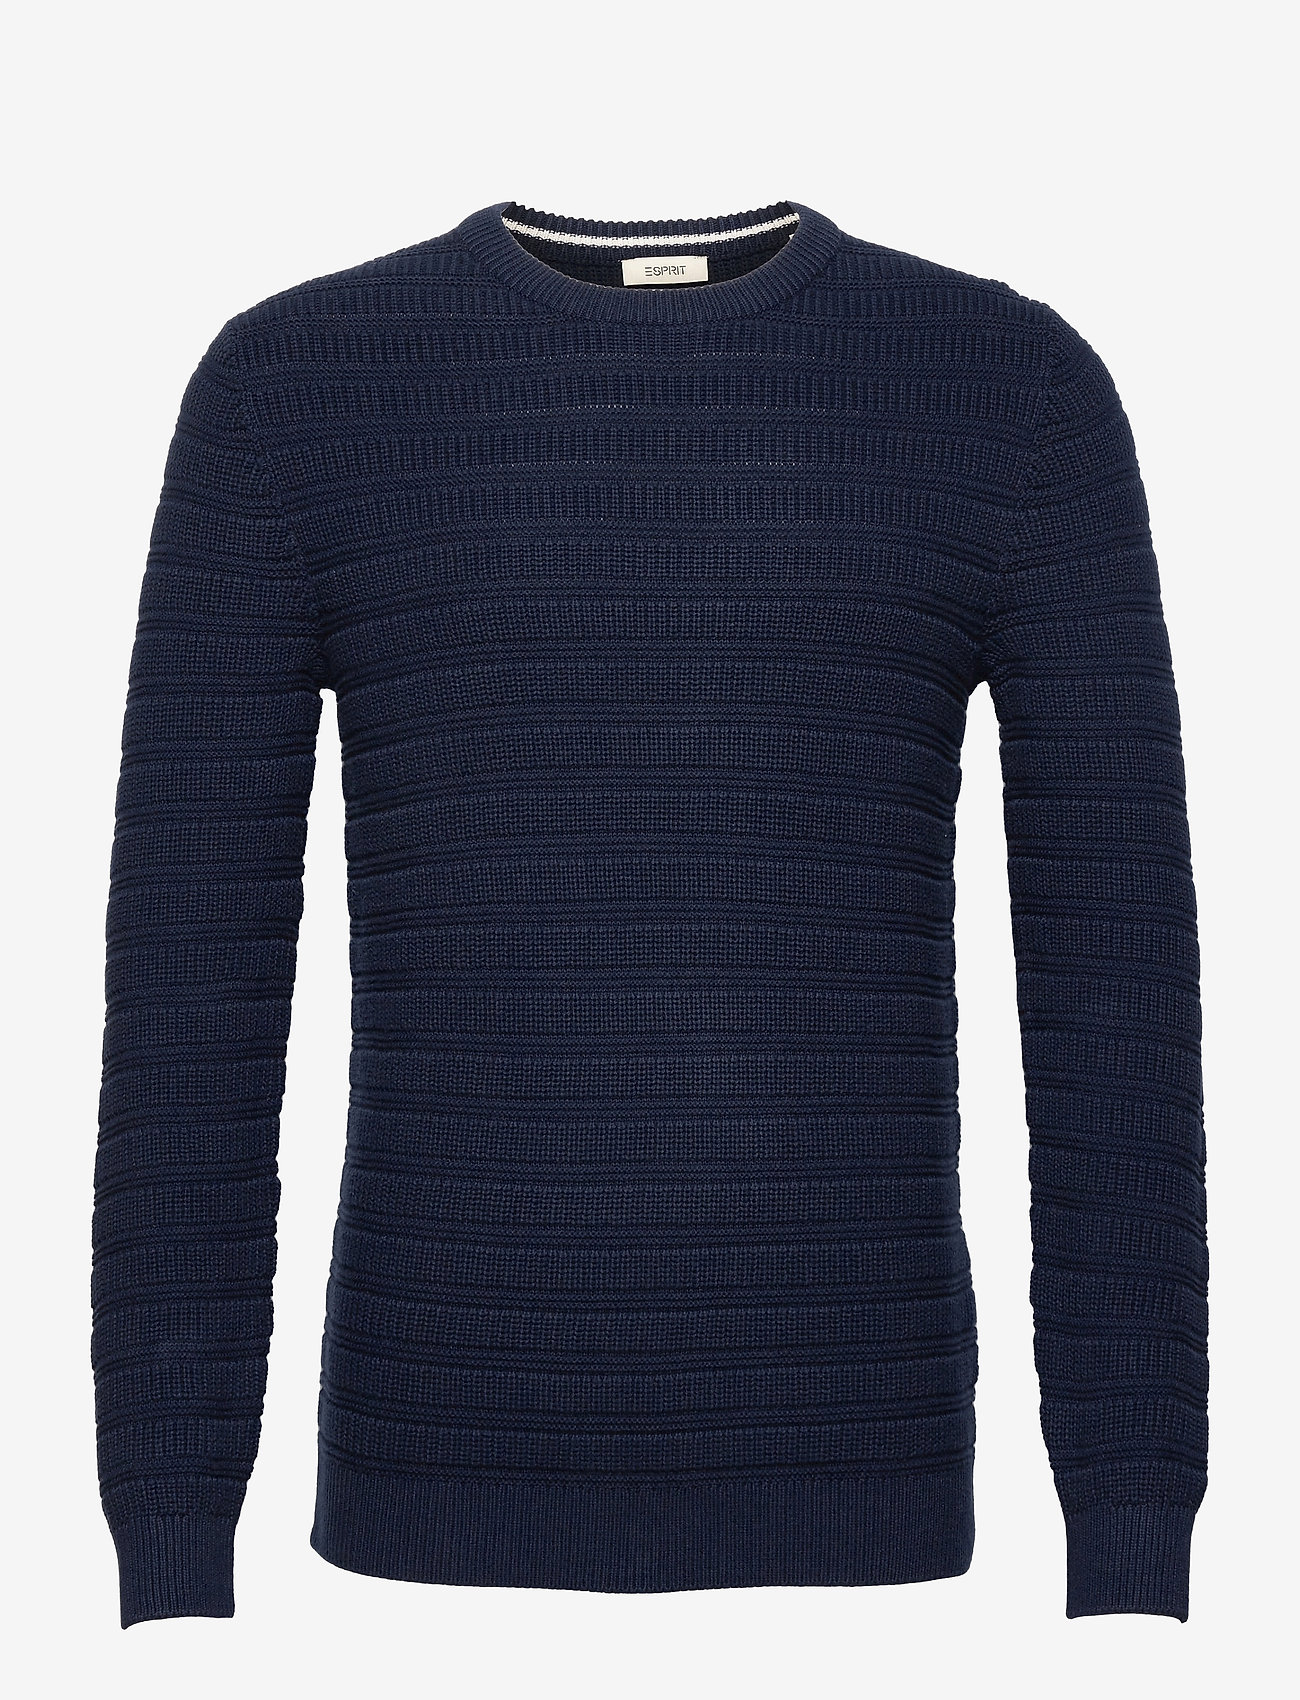 Esprit Casual - Sweaters - navy - 0